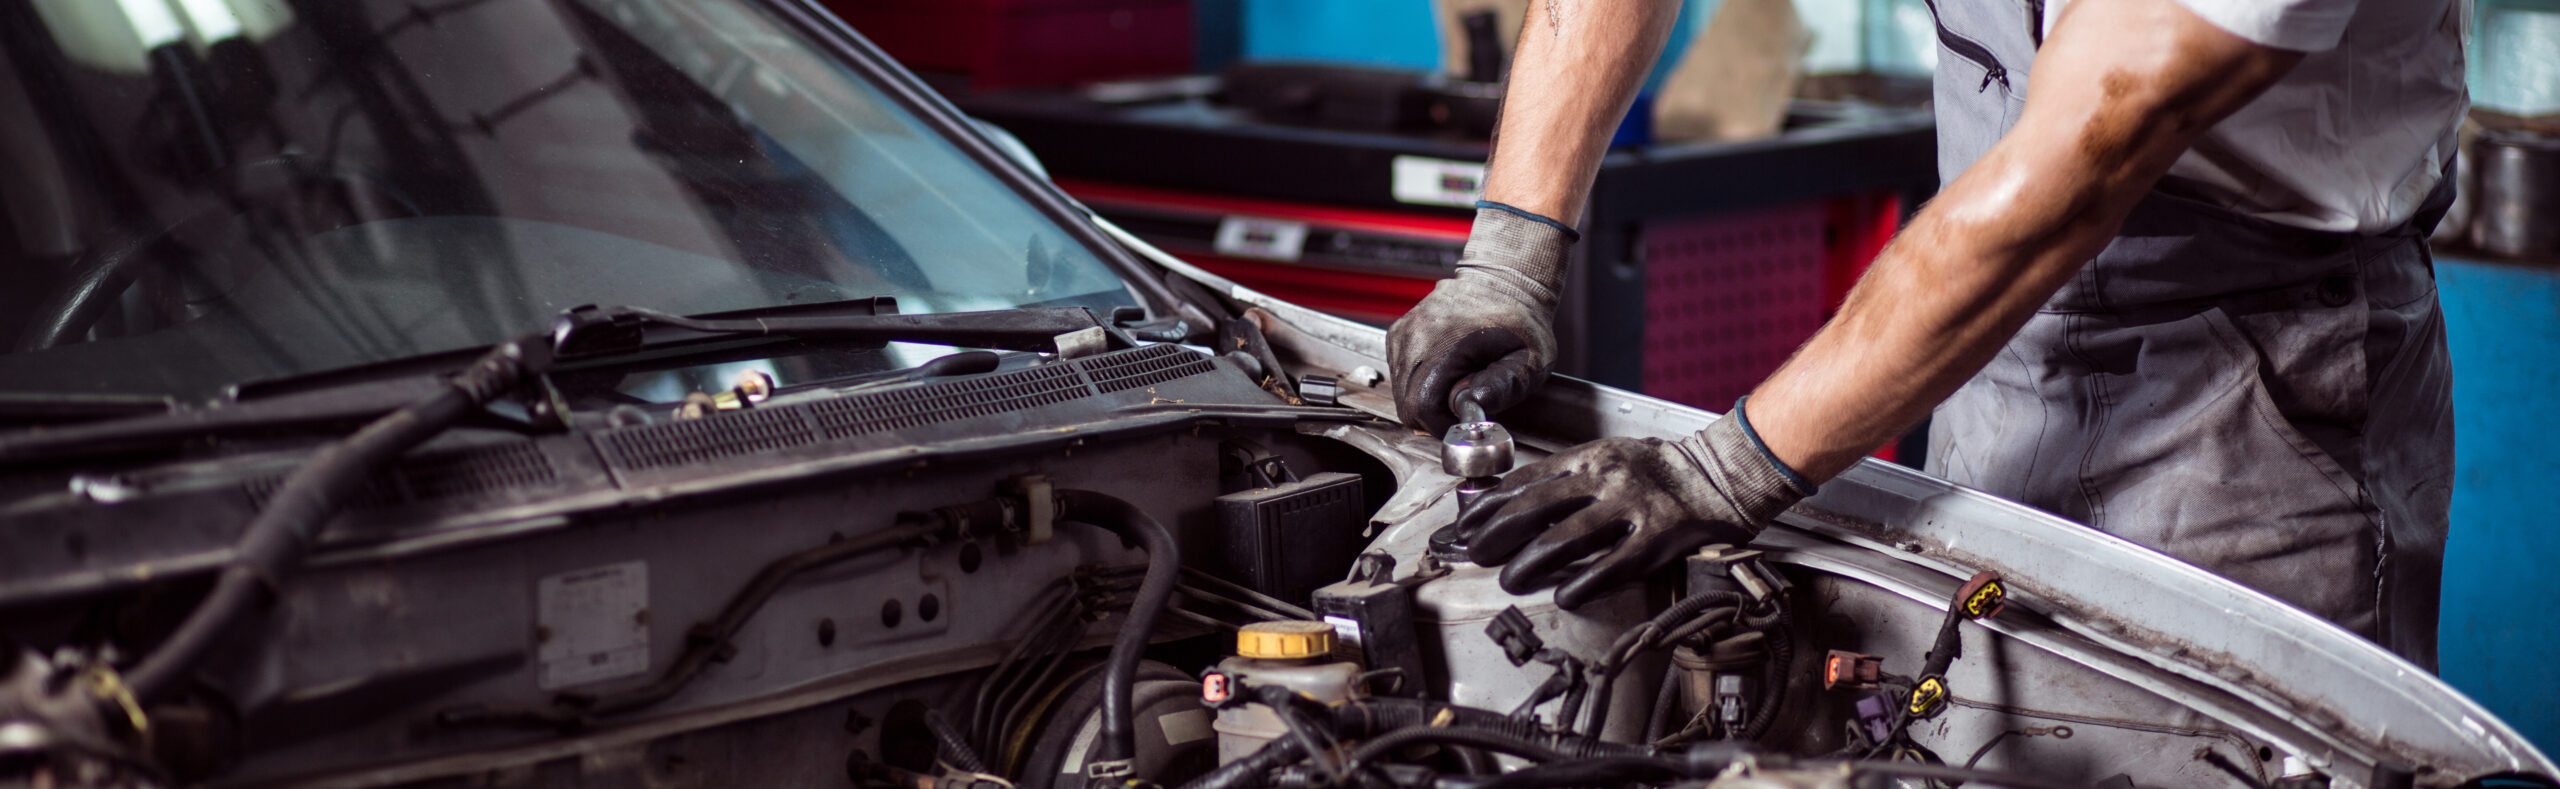 Auto Repair for Consistent Vehicle Performance